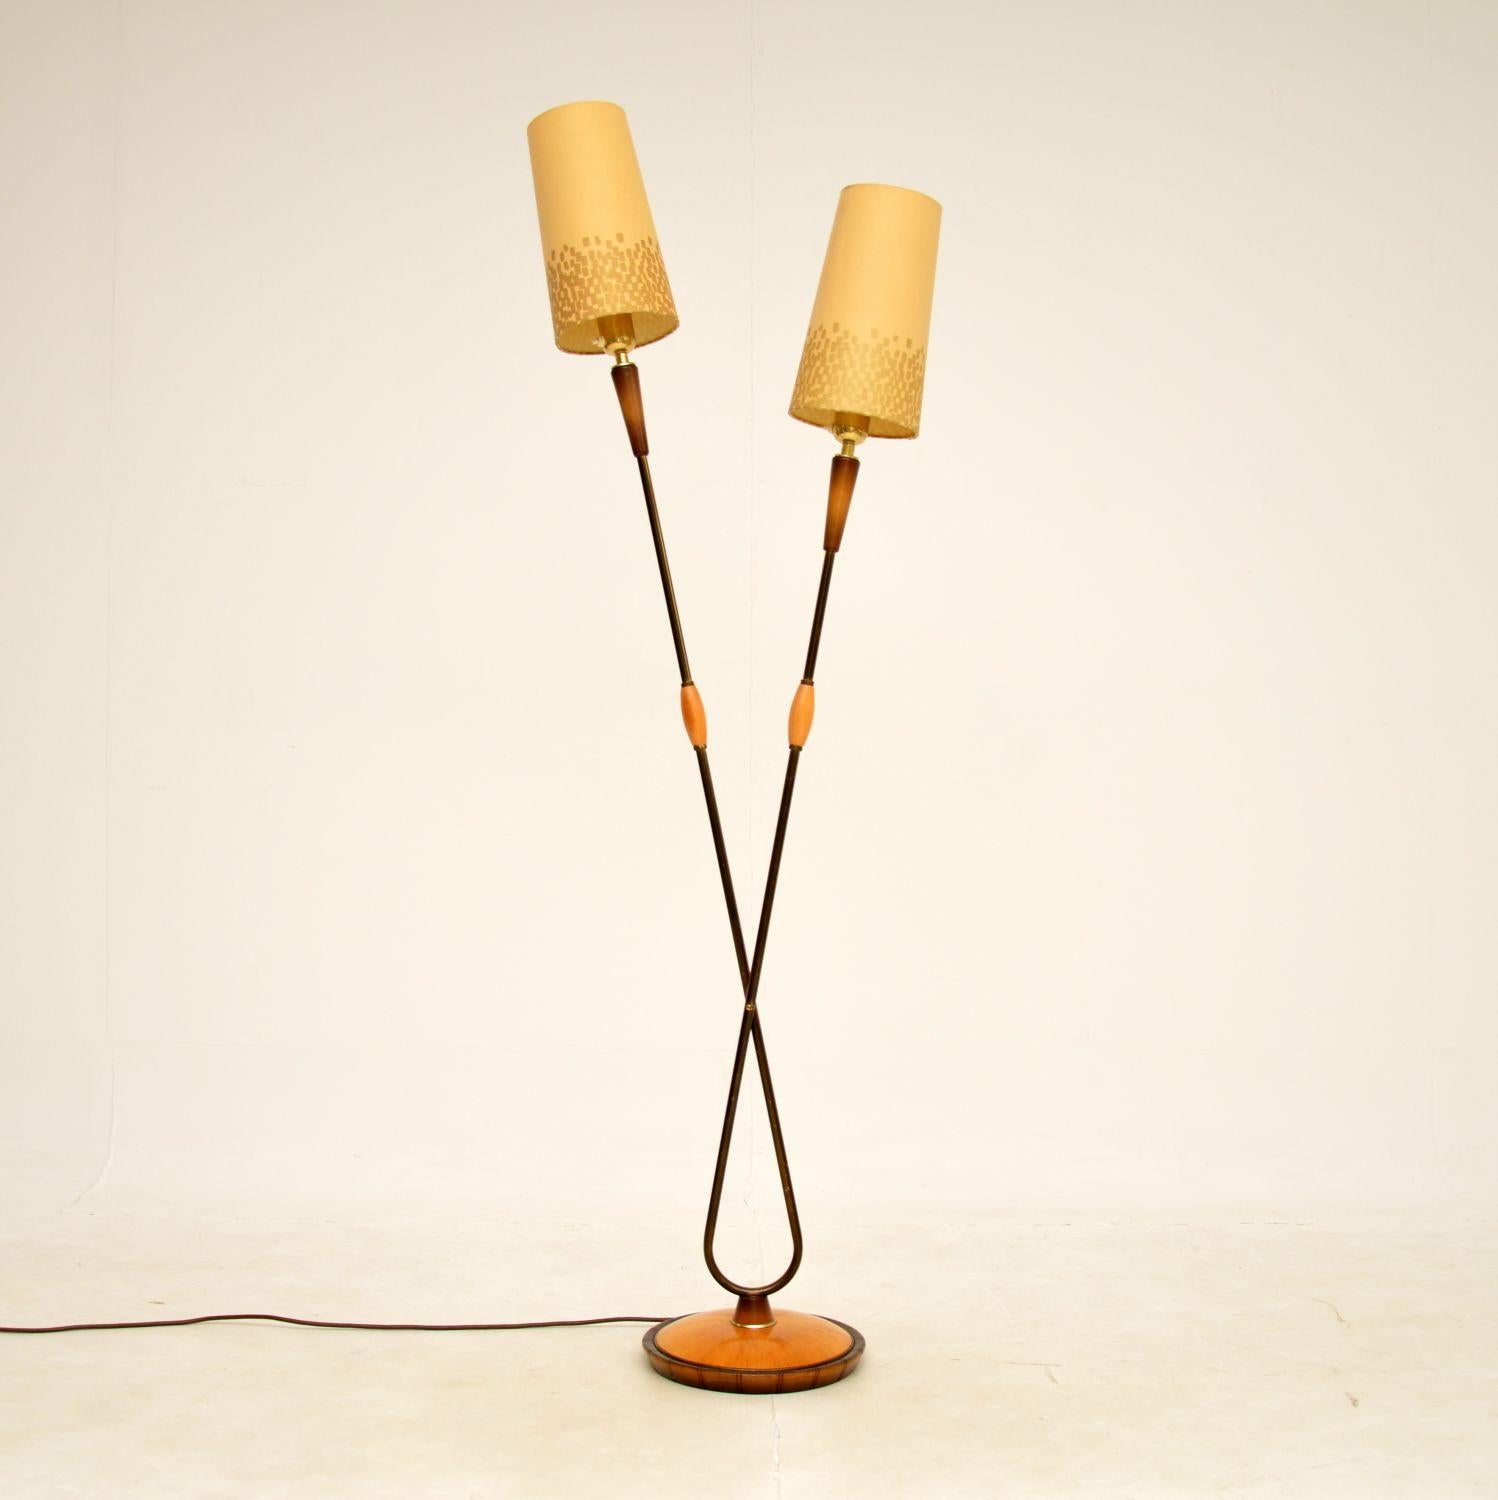 A stylish and extremely well made vintage double headed floor lamp. This was made in France, it dates from around the 1960s.

The quality is exceptional, this is beautifully made from solid brass with a walnut base and accents. The brass has